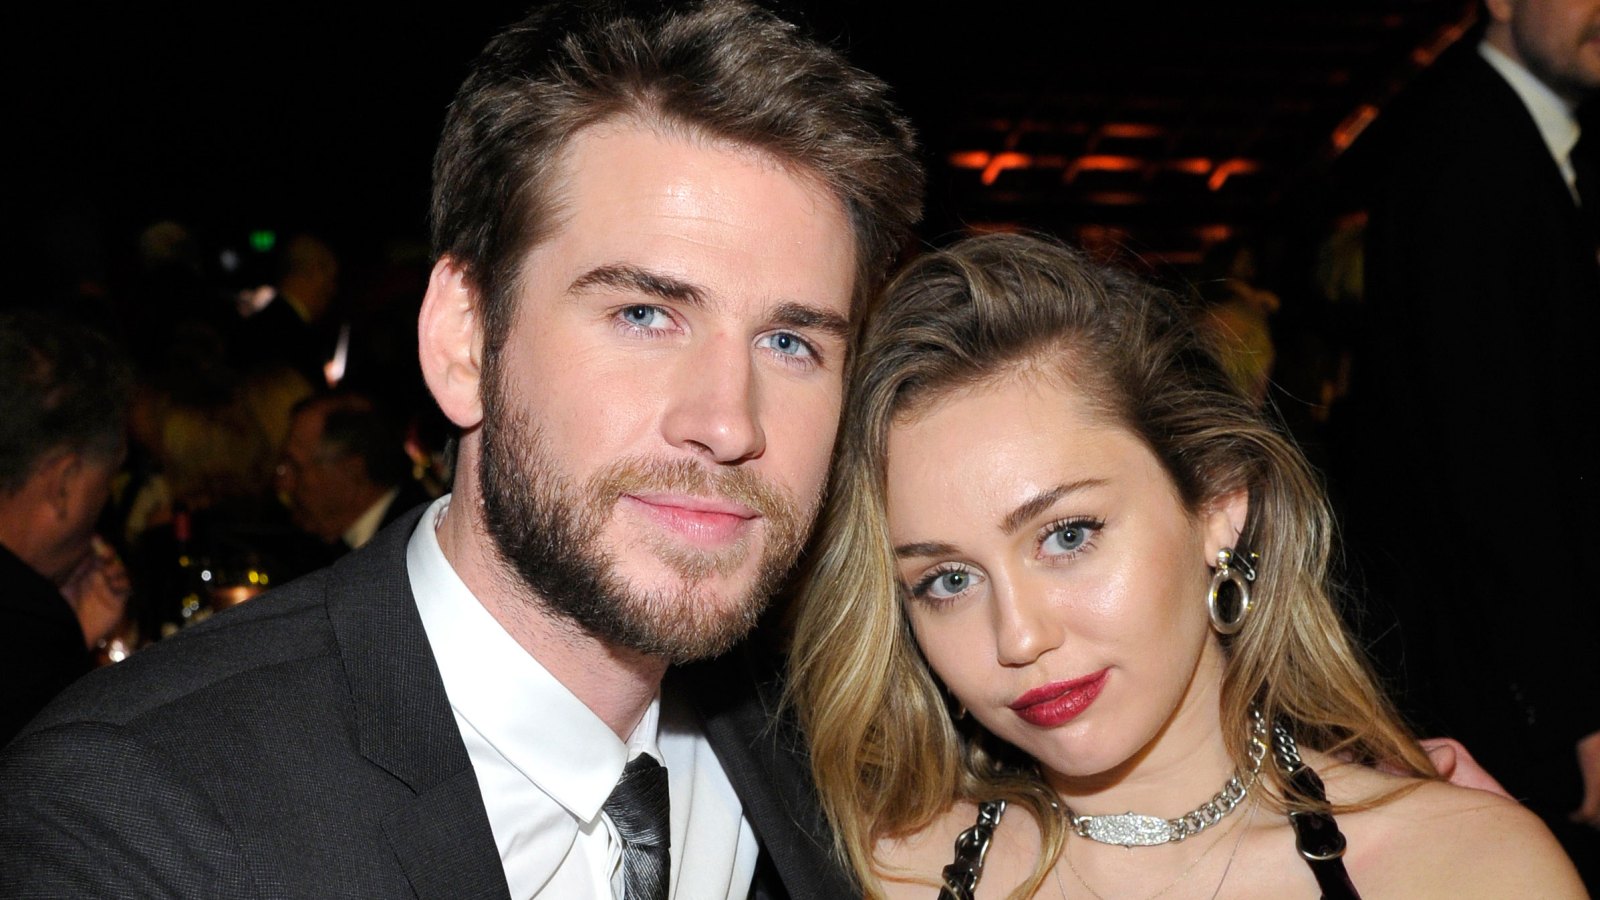 Liam Hemsworth Leaves Spicy Comment on Miley Cyrus Instagram